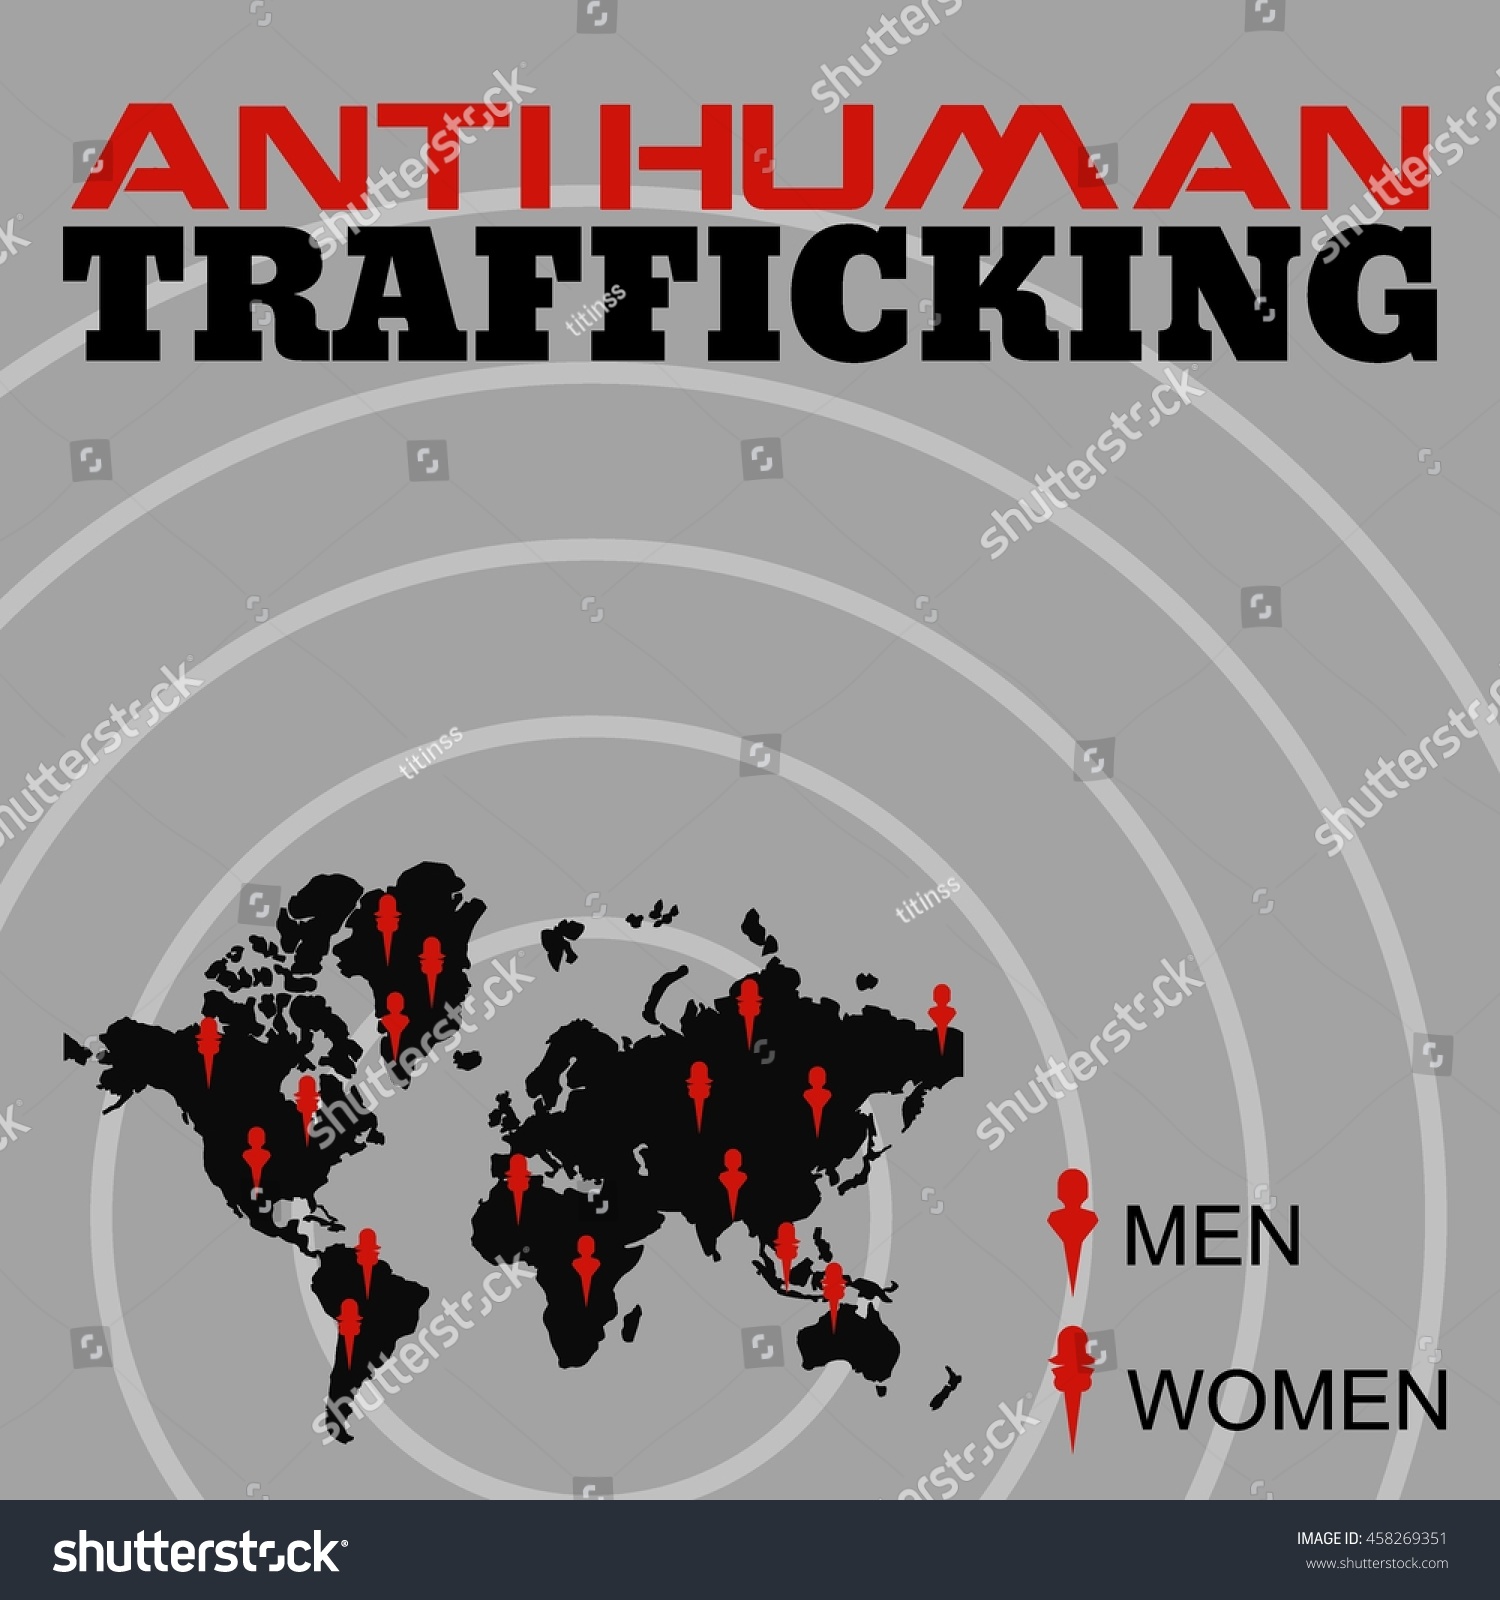 Anti Human Trafficking Campaign Vector Template Stock Vector Royalty Free 458269351 Shutterstock 4006